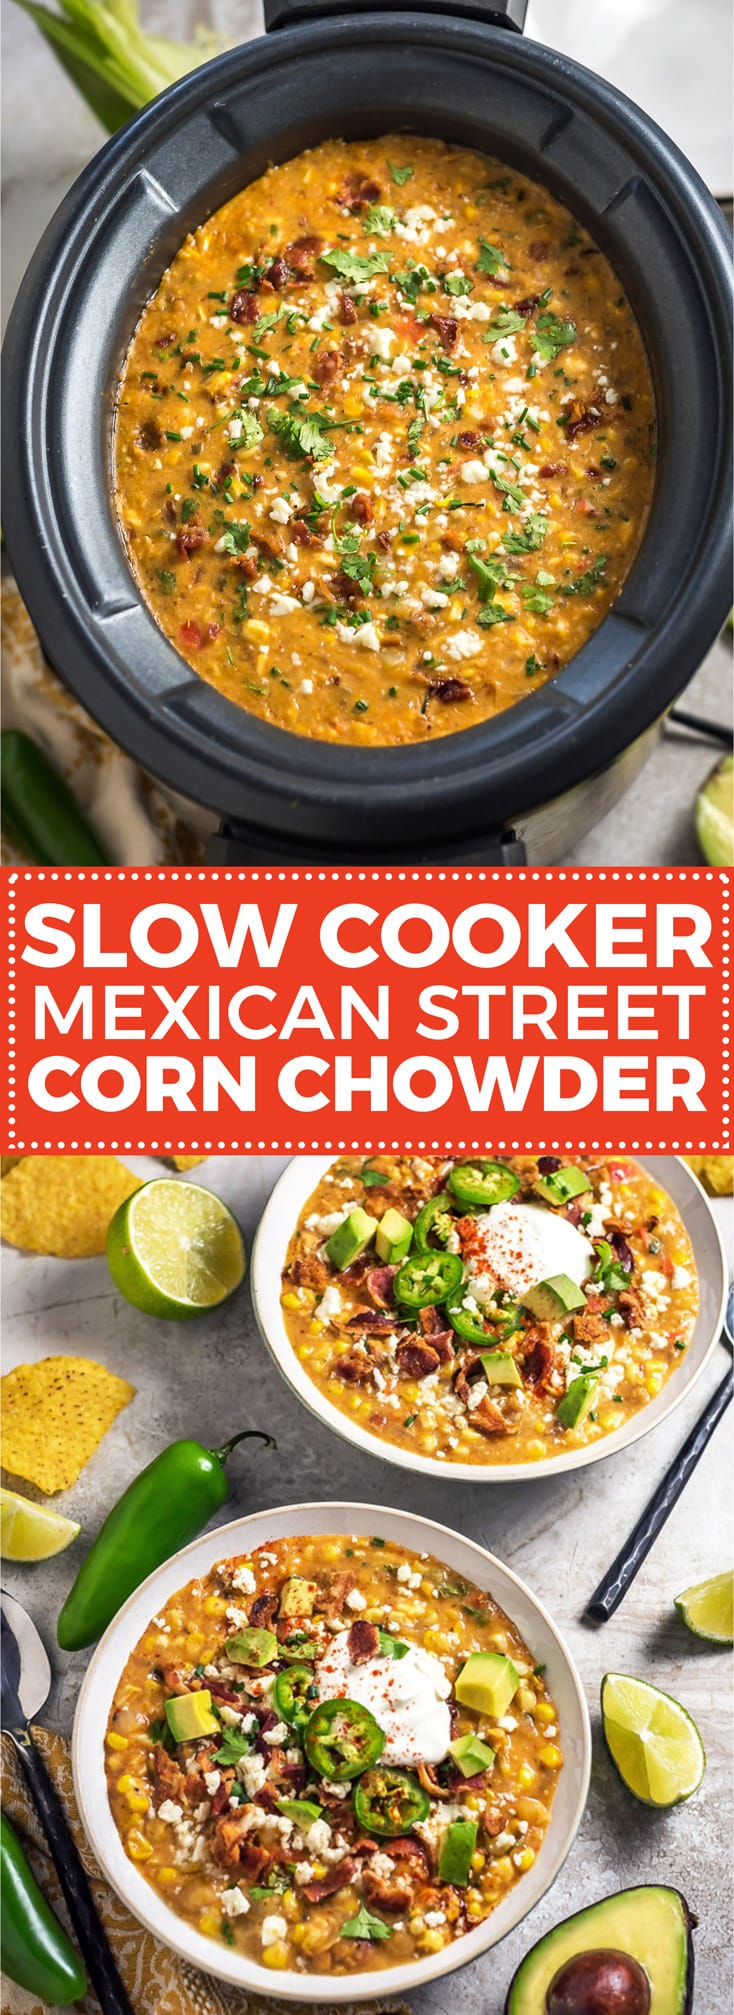 Slow Cooker Mexican Street Corn Chowder - Host The Toast